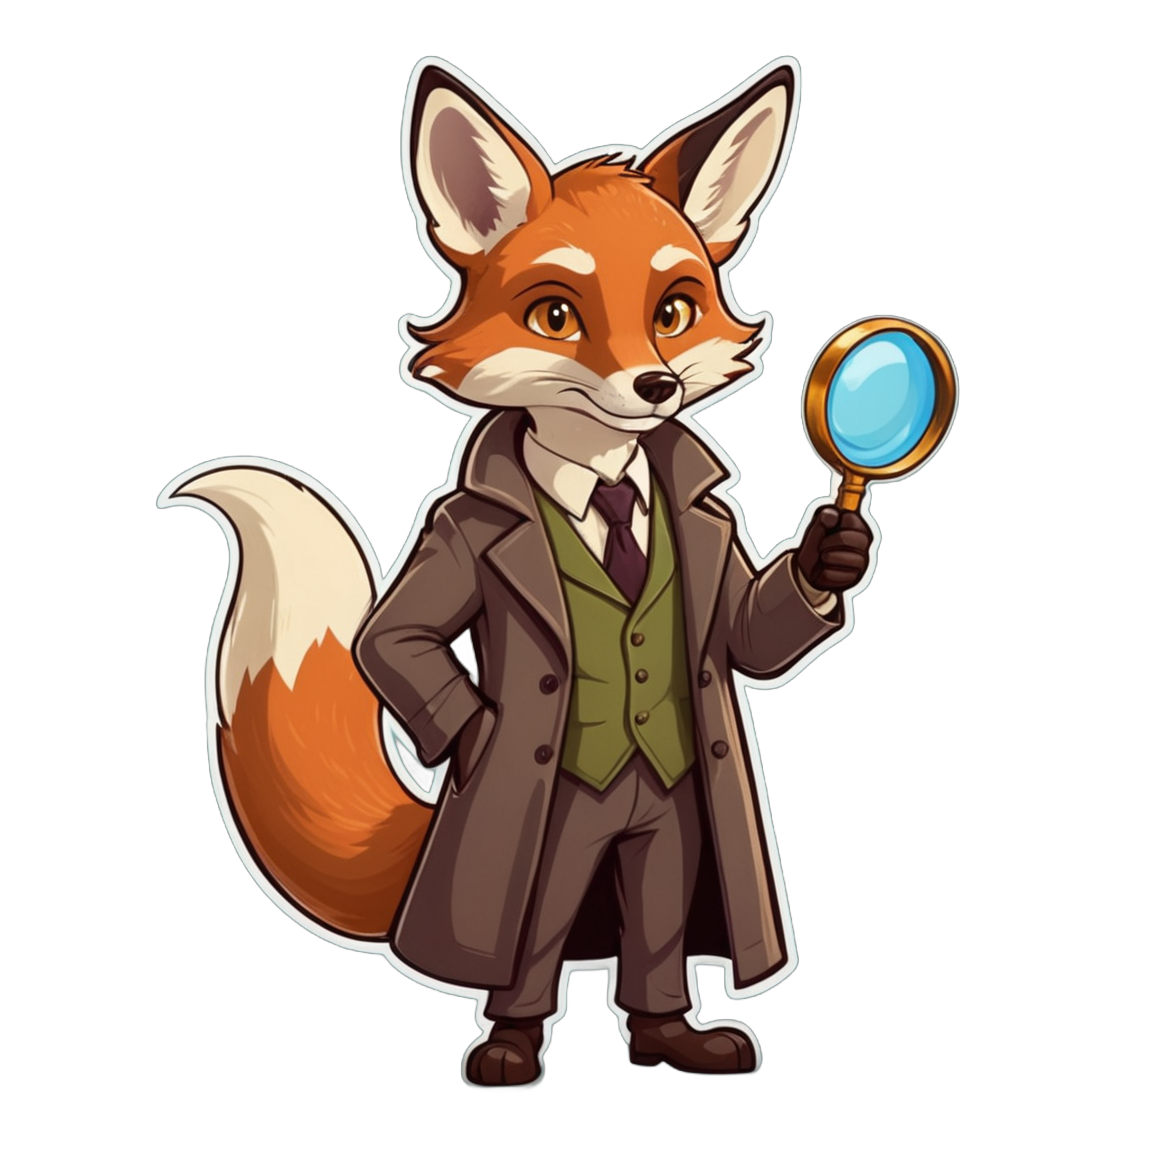 A fox Sherlock Holmes with a magnifying glass and an inquisitive gaze